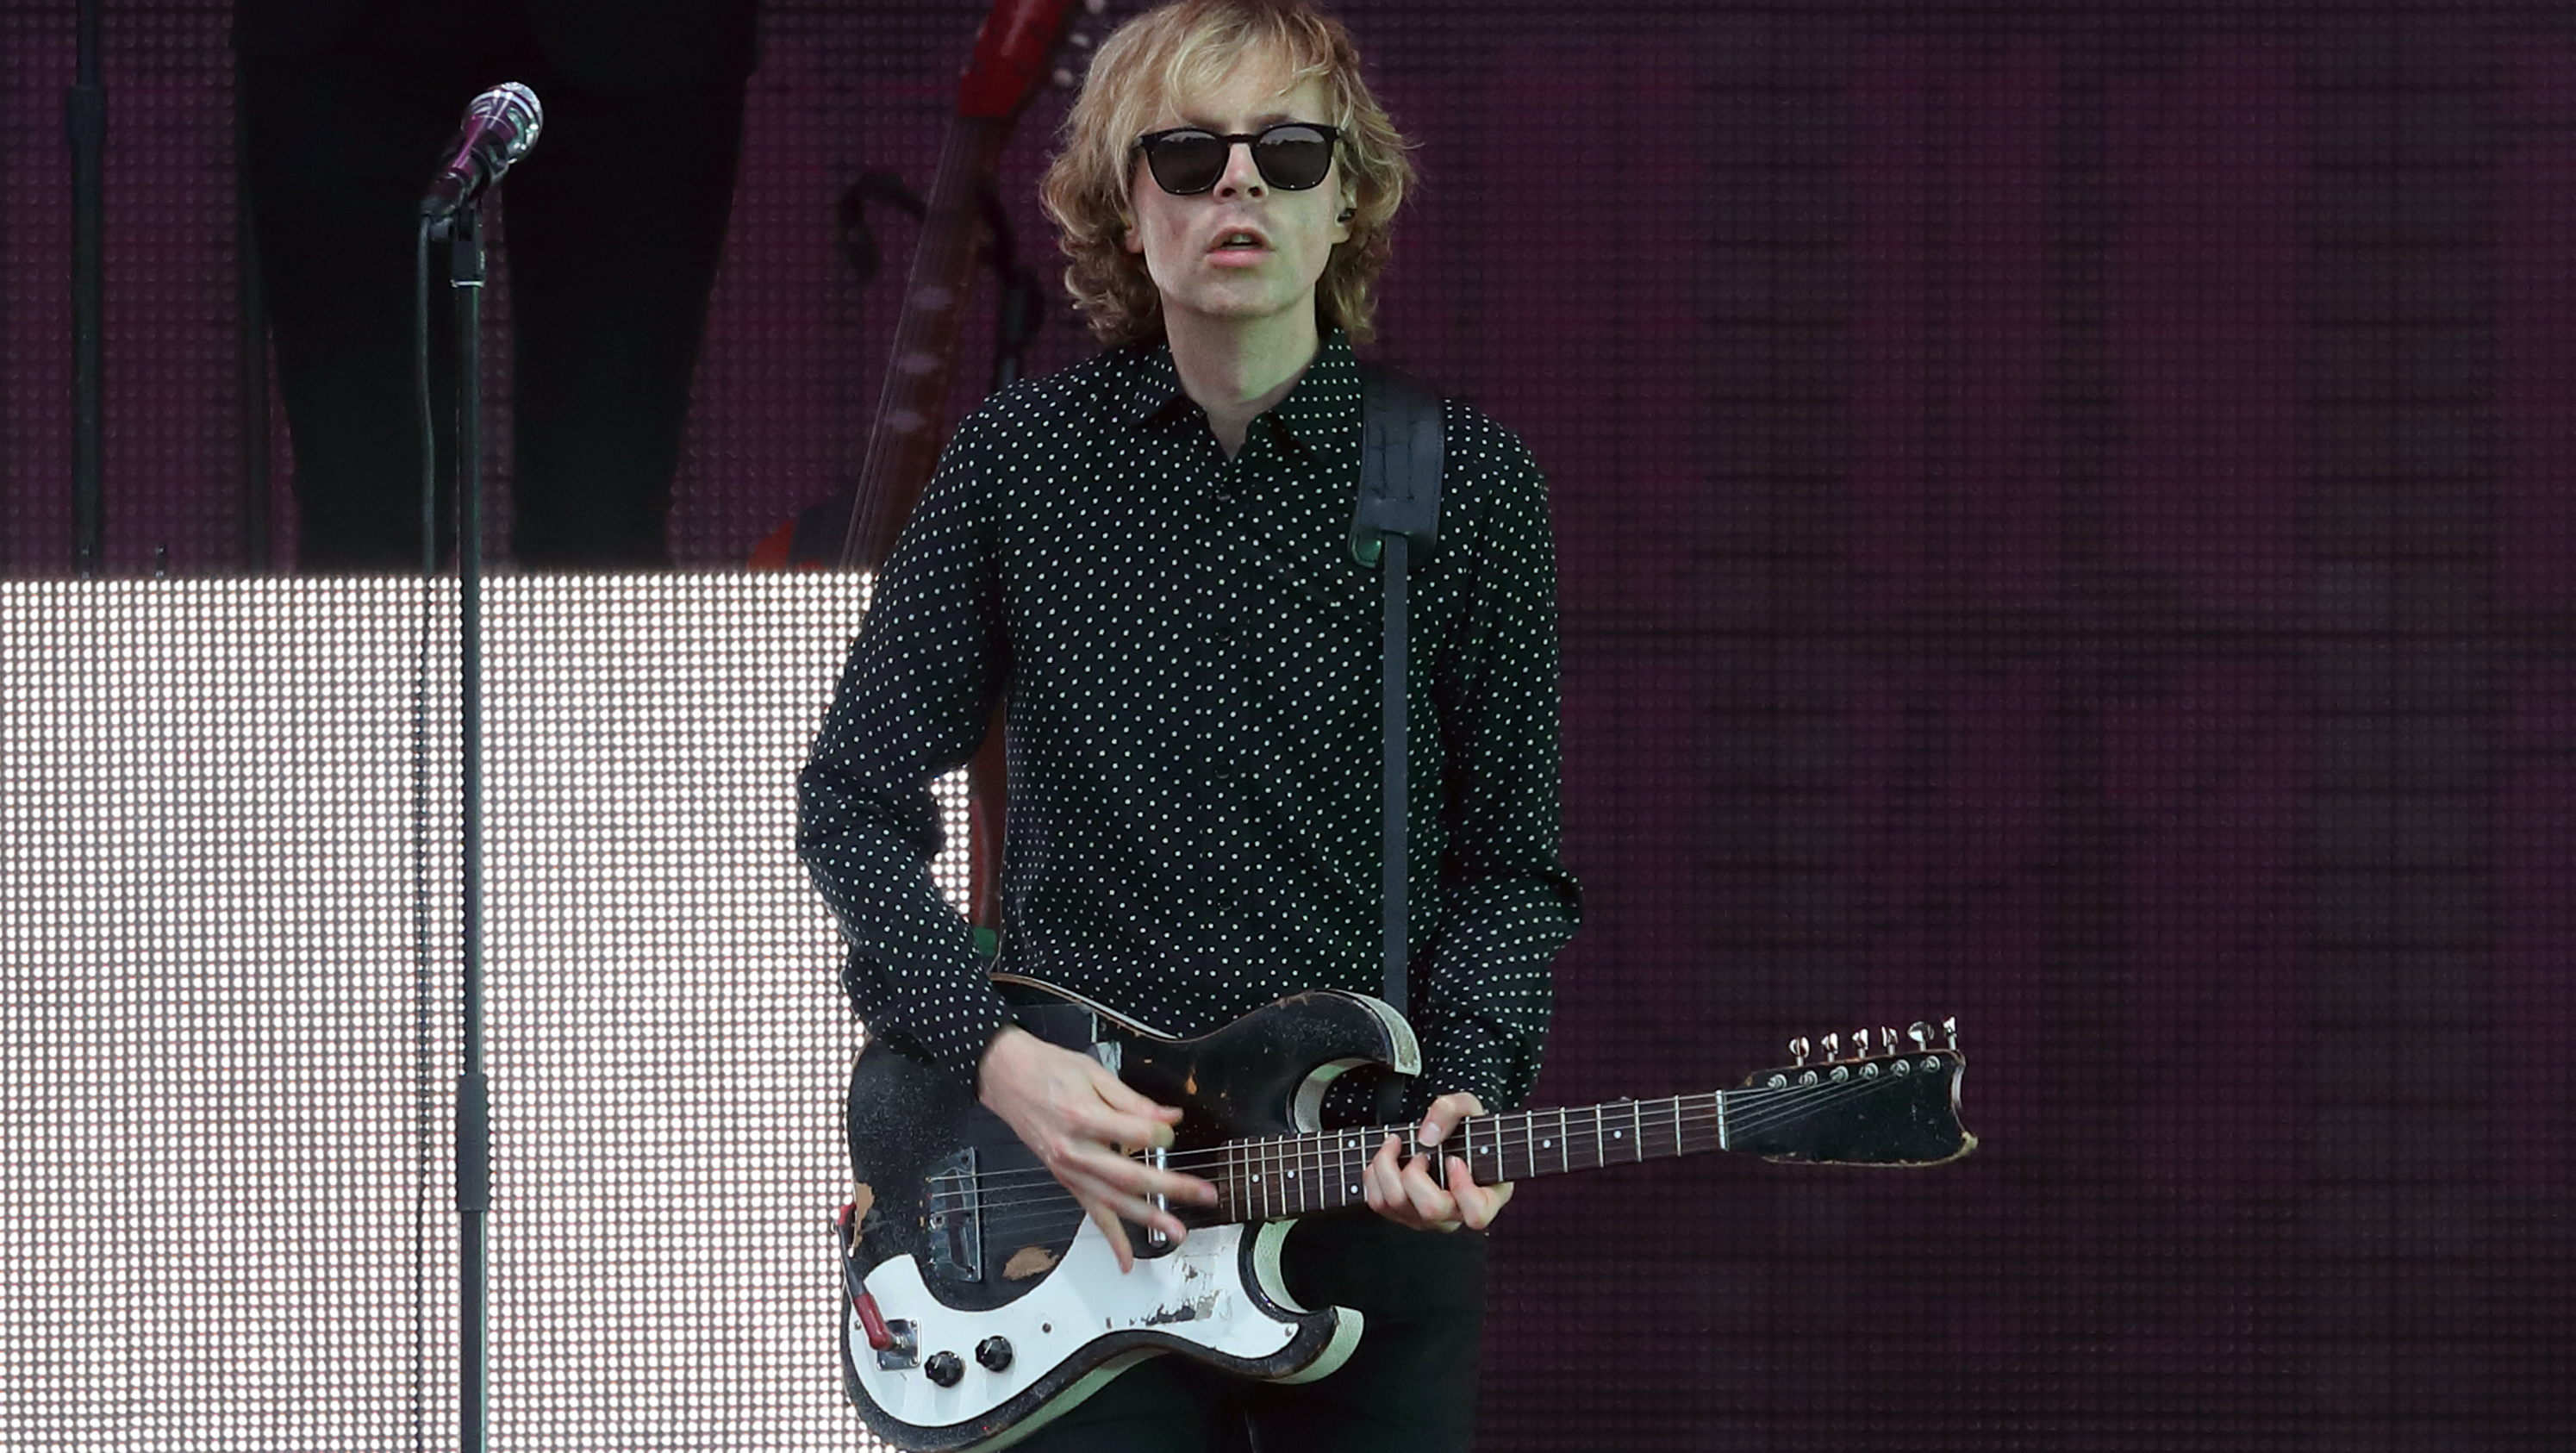 Beck: I used a $60 particle board guitar to record most of my